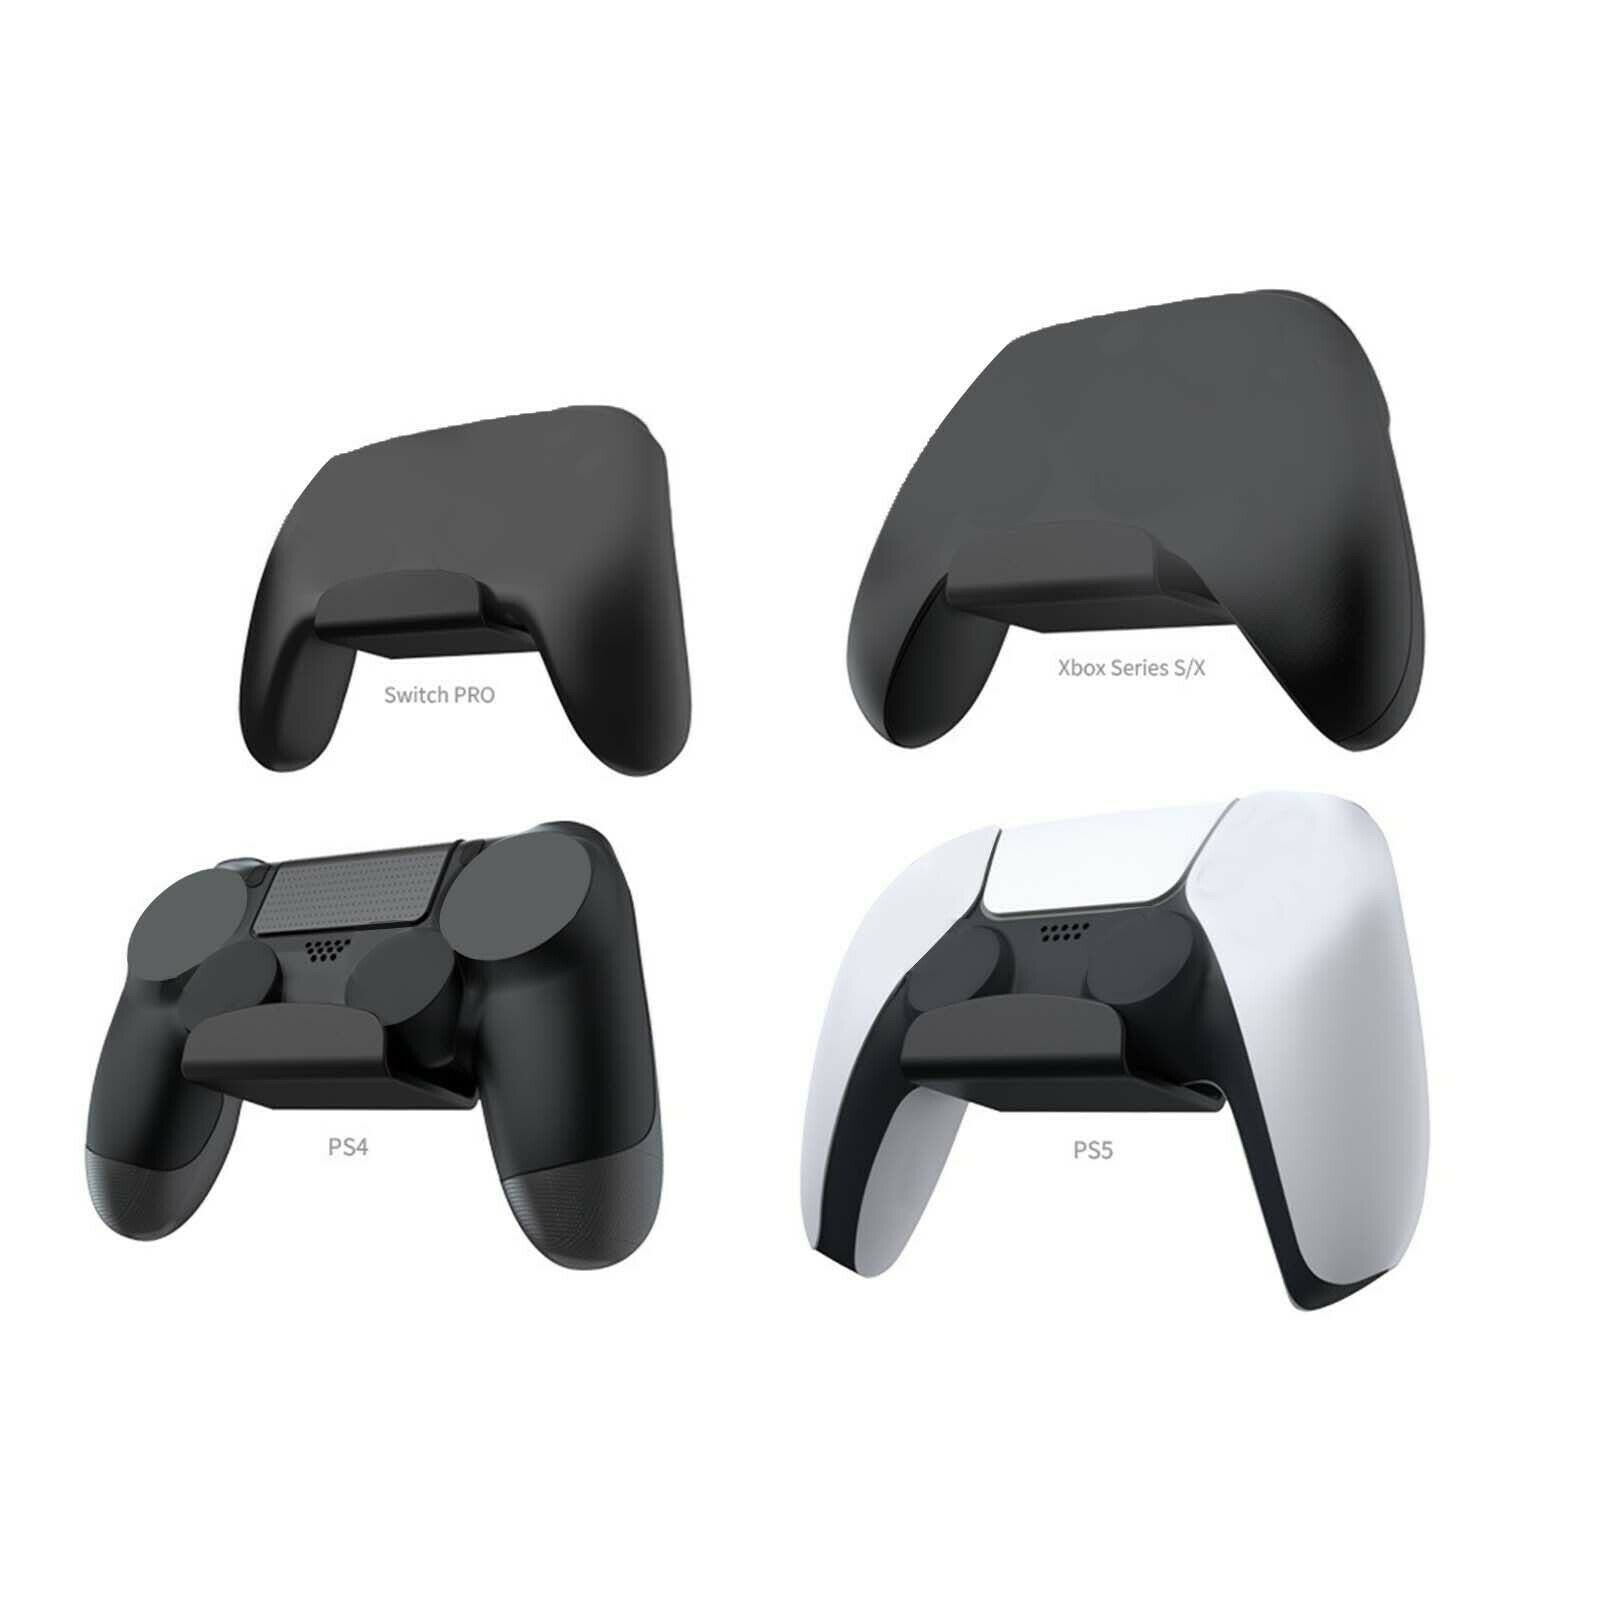 Game Handle Hook Headset Holder Accessories Organizer for PS4 for PS5 Black